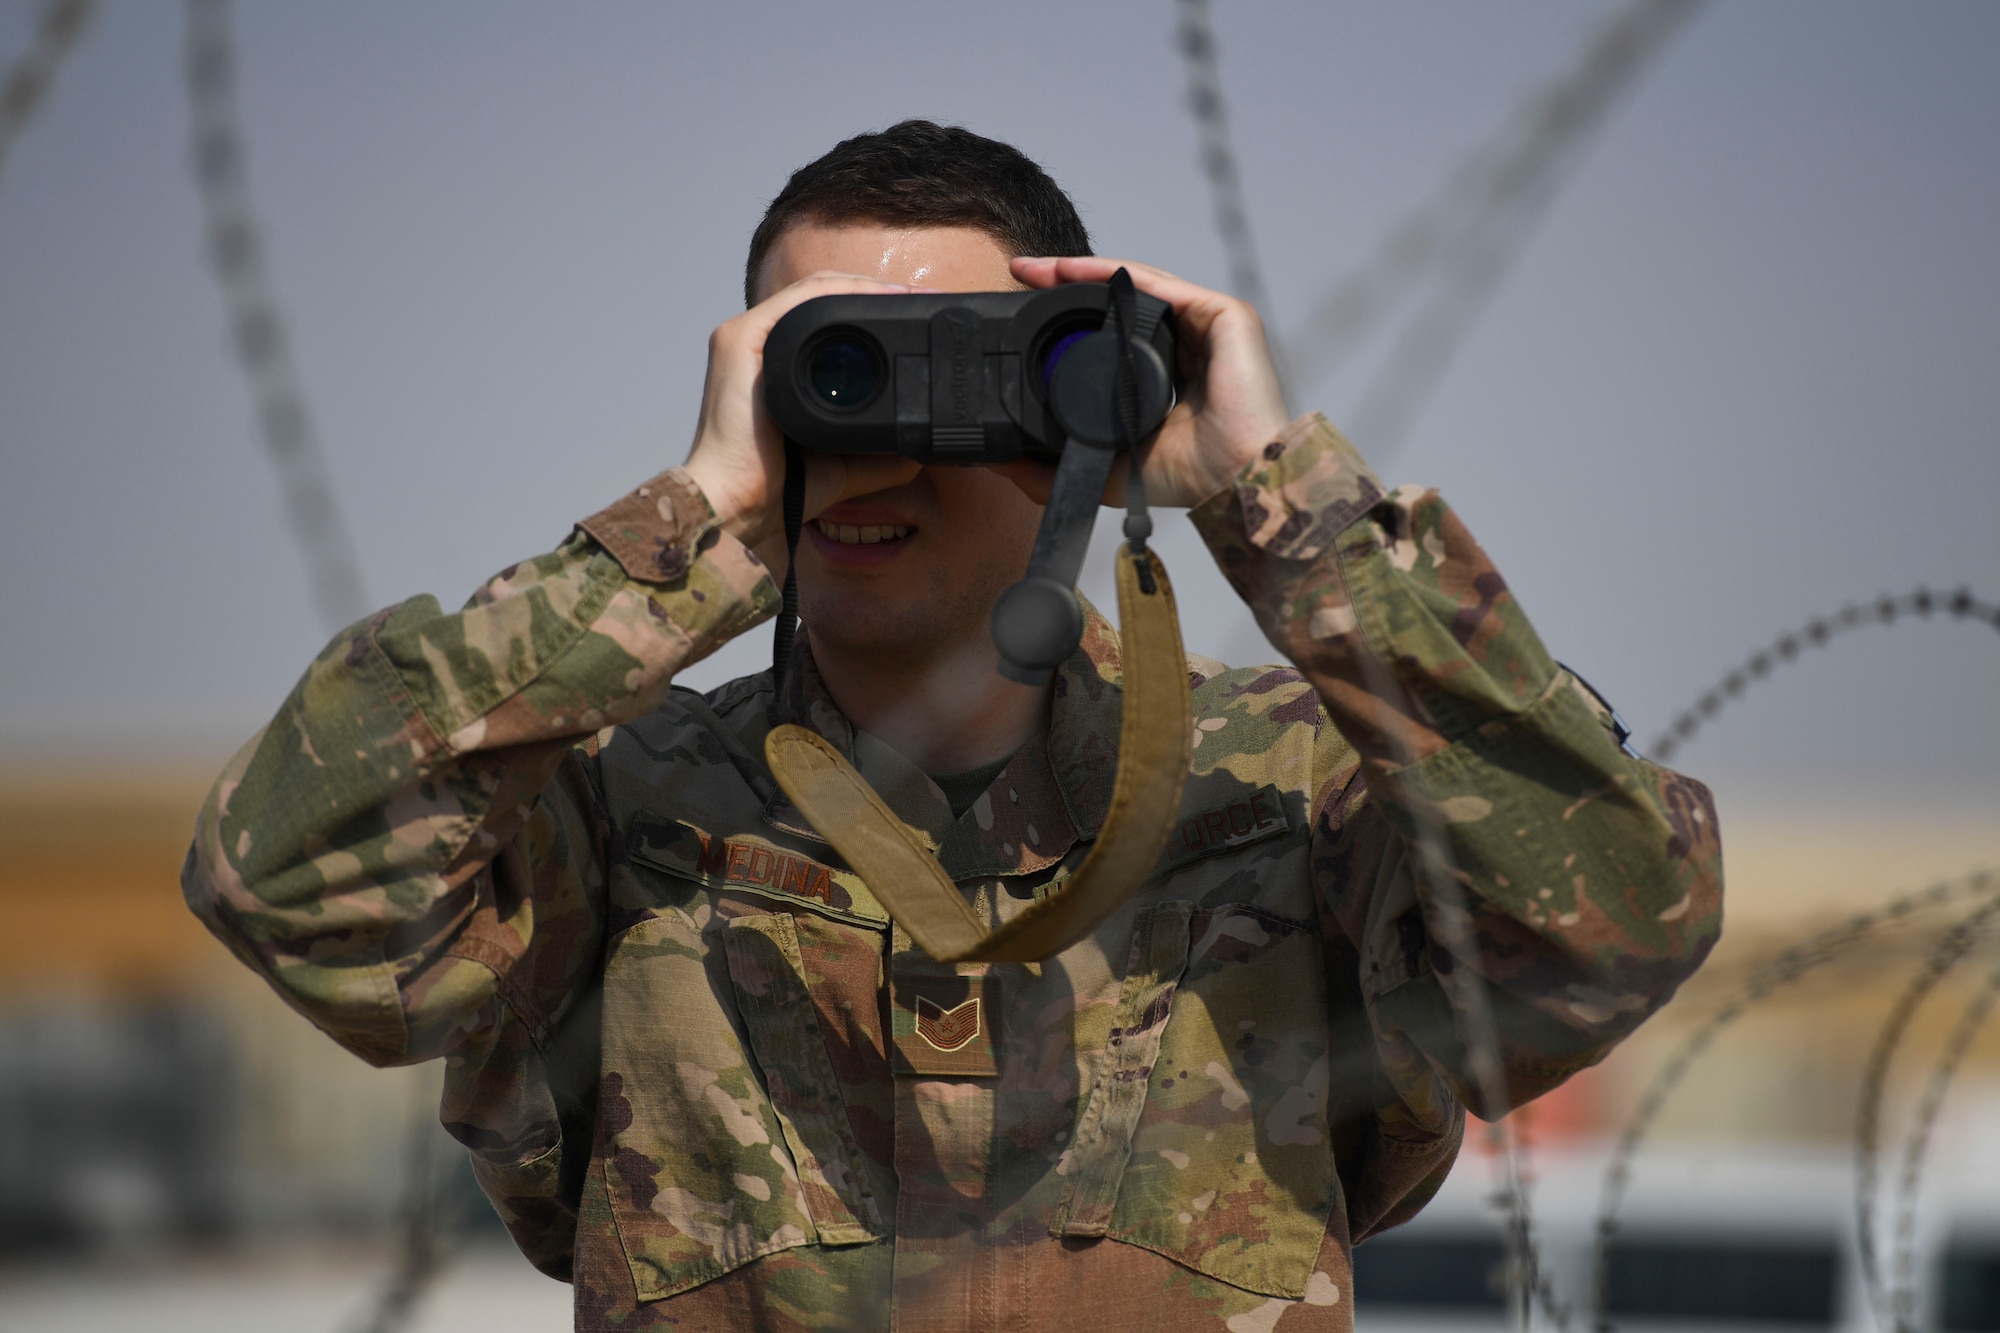 U.S. Air Force Tech. Sgt. Austin Medina, 22nd Expeditionary Weather Squadron non-commissioned officer in charge, uses a laser rangefinder at Camp Buehring, Kuwait, Oct. 2, 2020.